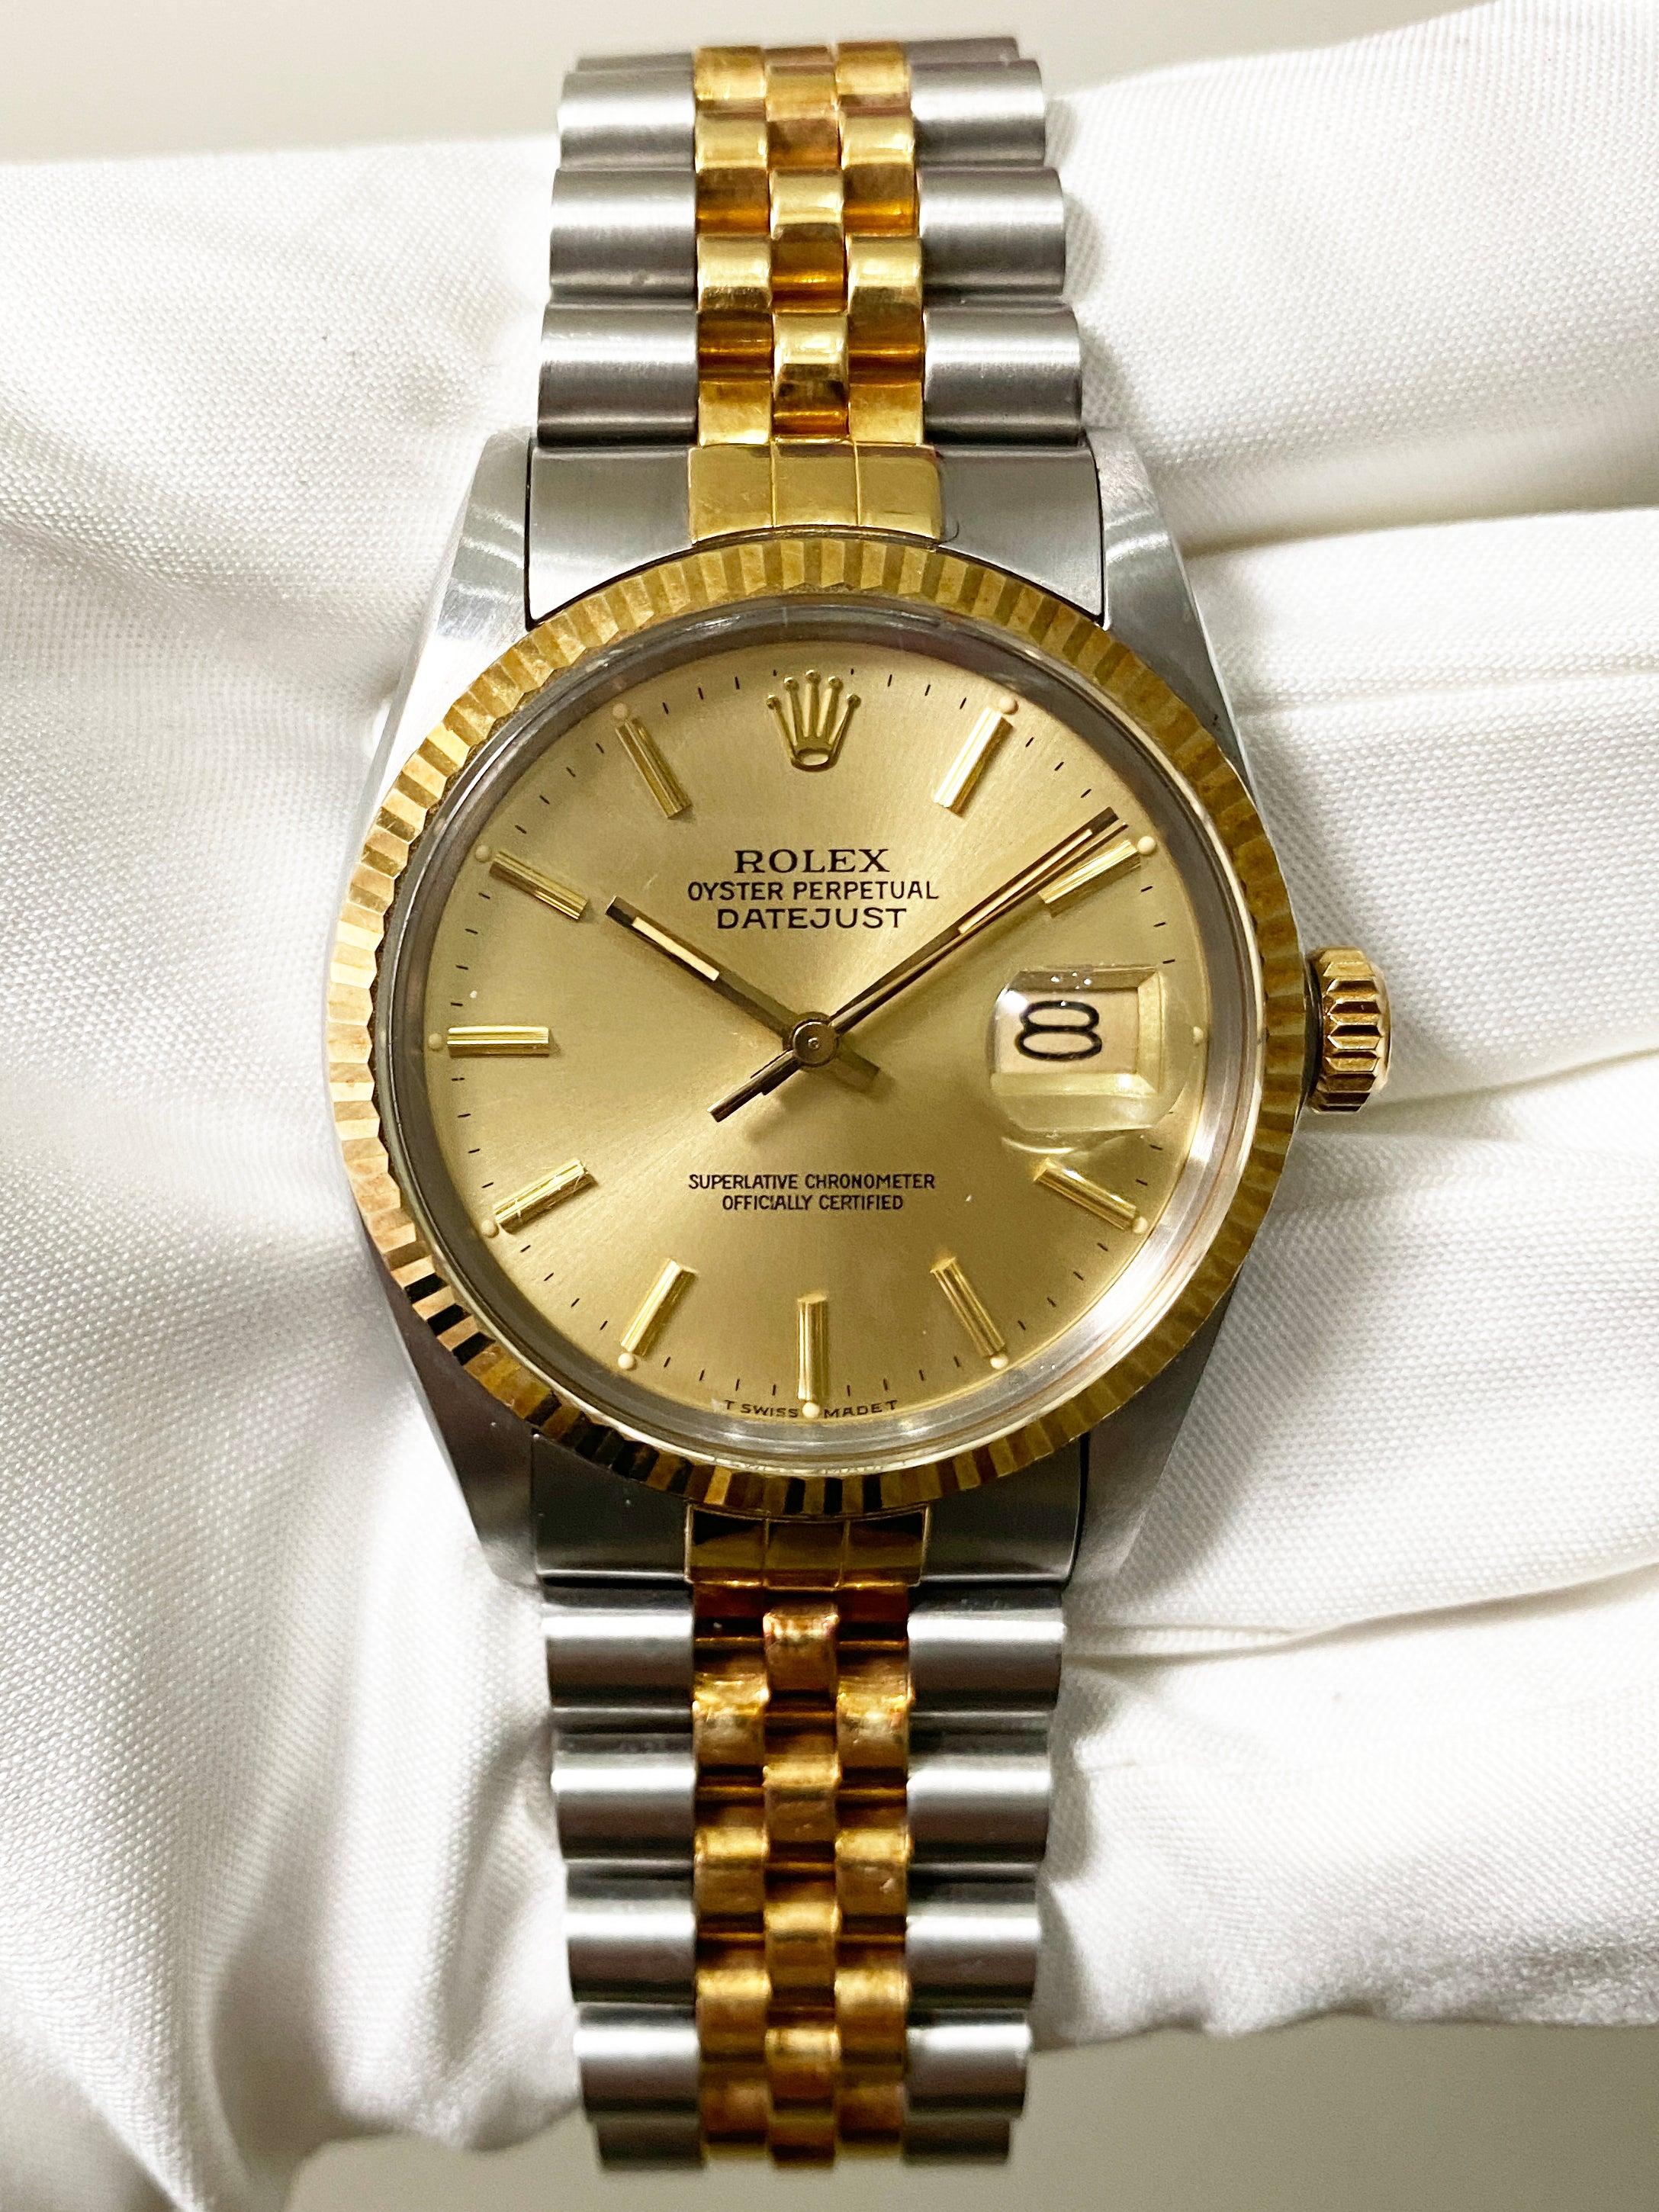 
Rolex Datejust 16013 Mens Watch. 36mm Stainless Steel case. 18k Yellow Gold fluted bezel. Champagne dial with gold hands and index hour markers. Minute markers on the outer dial. Date display at the 3 o'clock position. Stainless Steel & 18k yellow